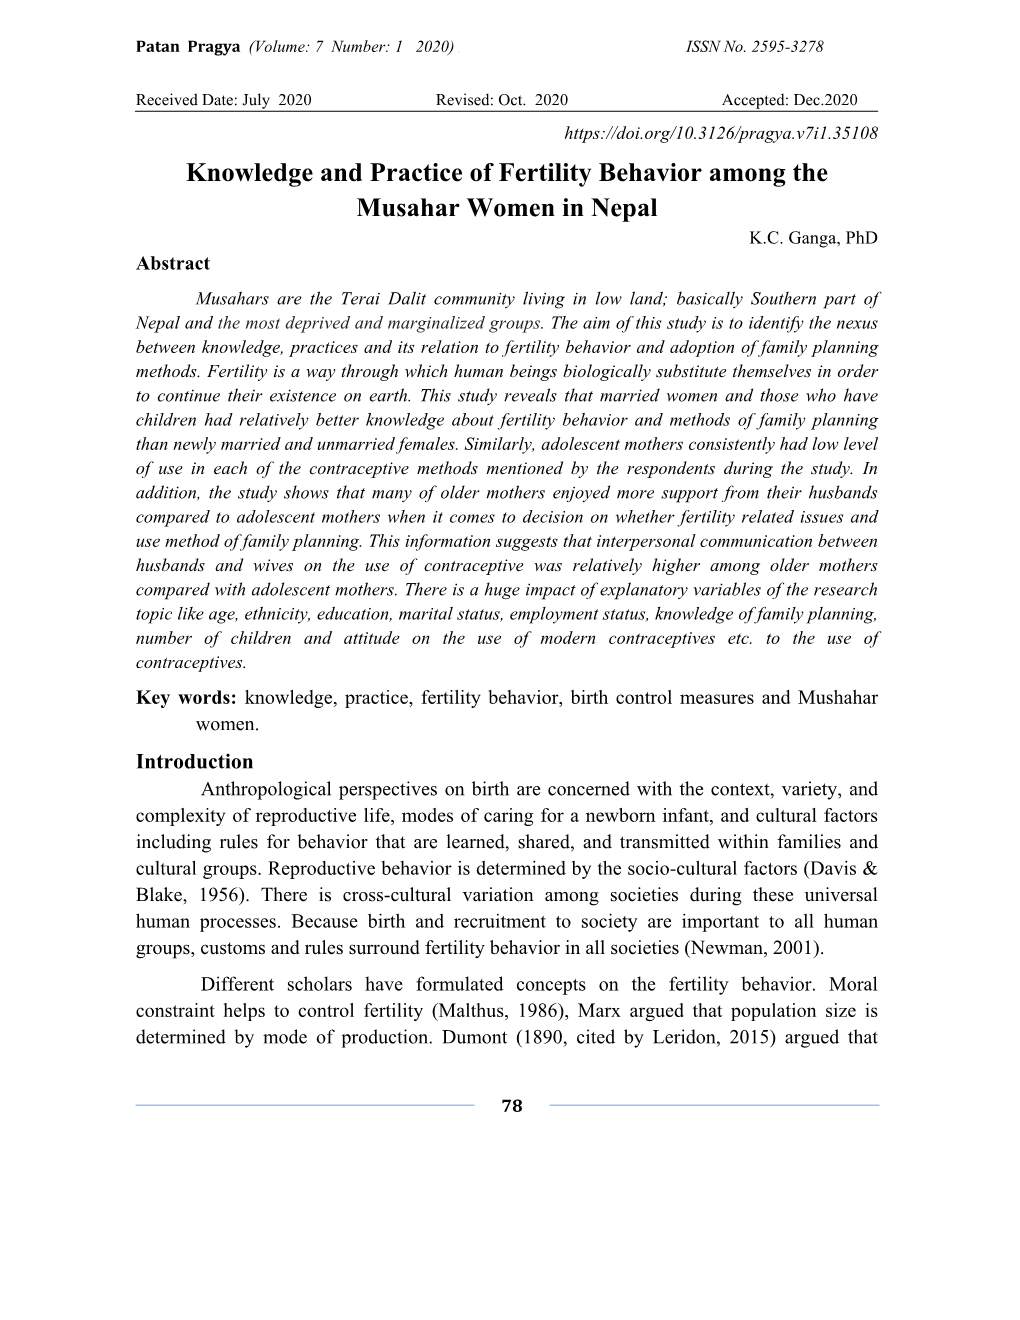 Knowledge and Practice of Fertility Behavior Among the Musahar Women in Nepal K.C